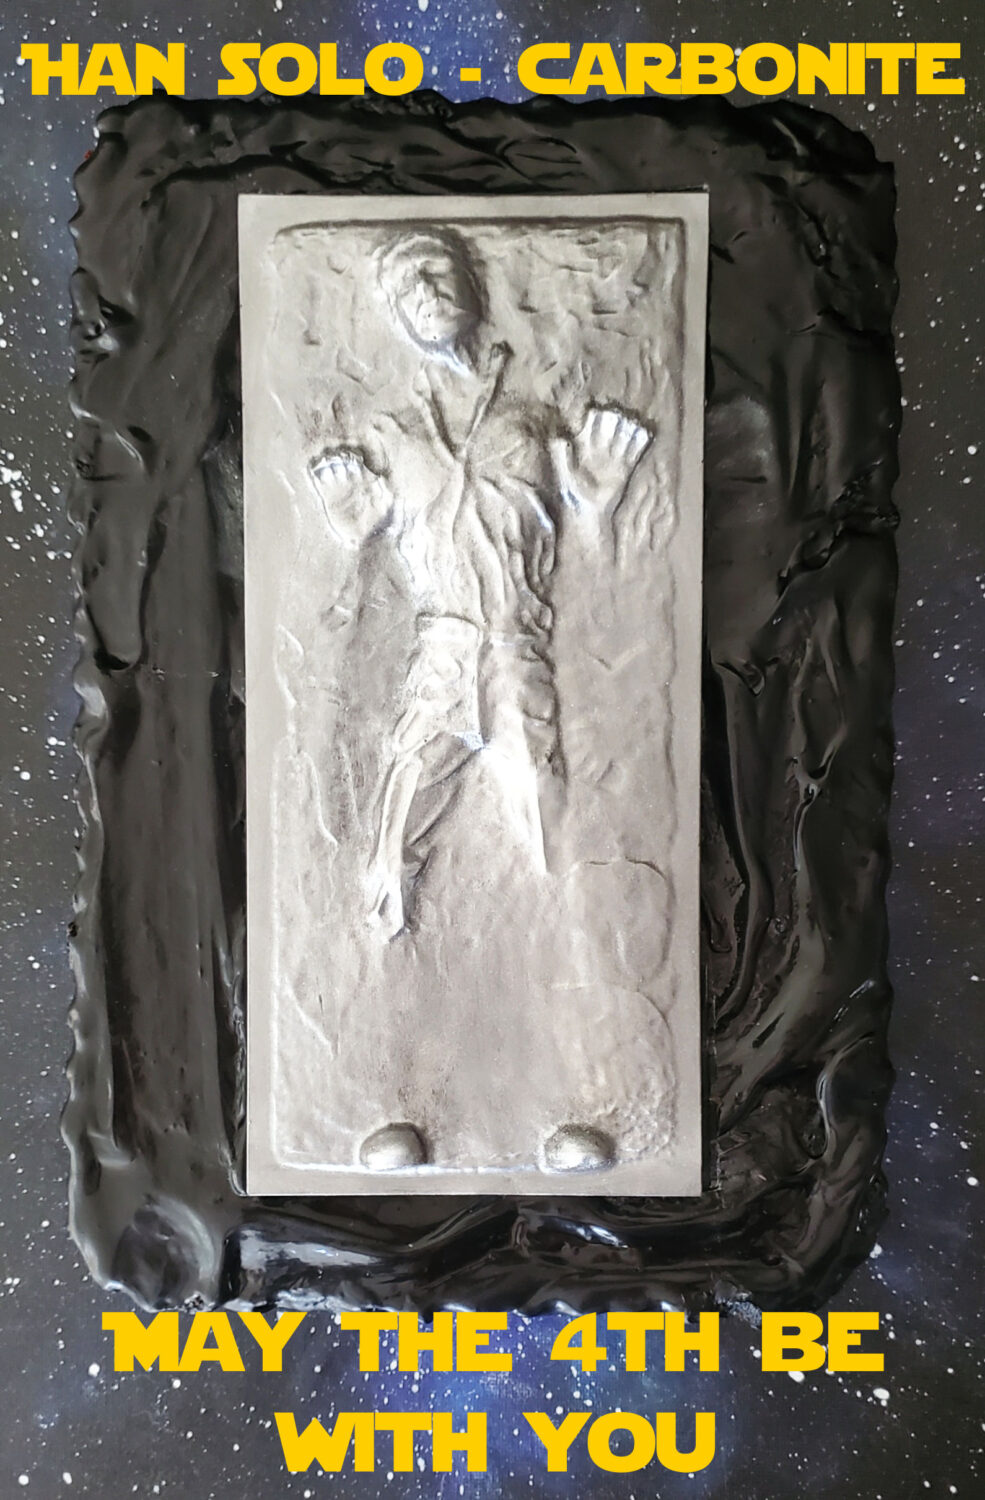 May the 4th Be With You-Han Solo in Carbonite! Han Solo in chocolate served on an almond frangipane tart smothered in dark chocolate ganache.